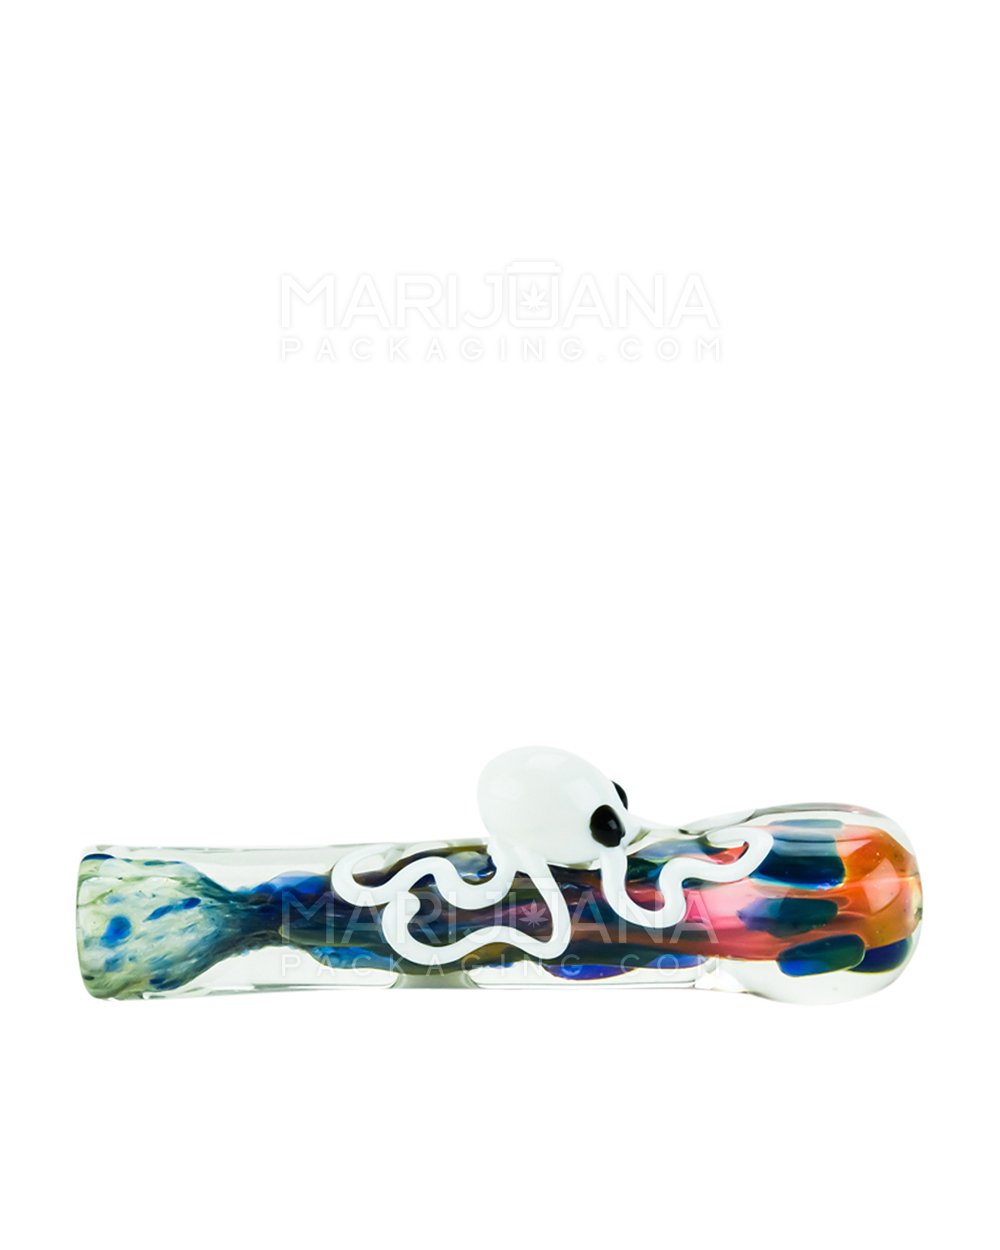 Frit & Multi Fumed Chillum Hand Pipe w/ Glass Squid & Speckles | 3.5in Long - Glass - Assorted - 6